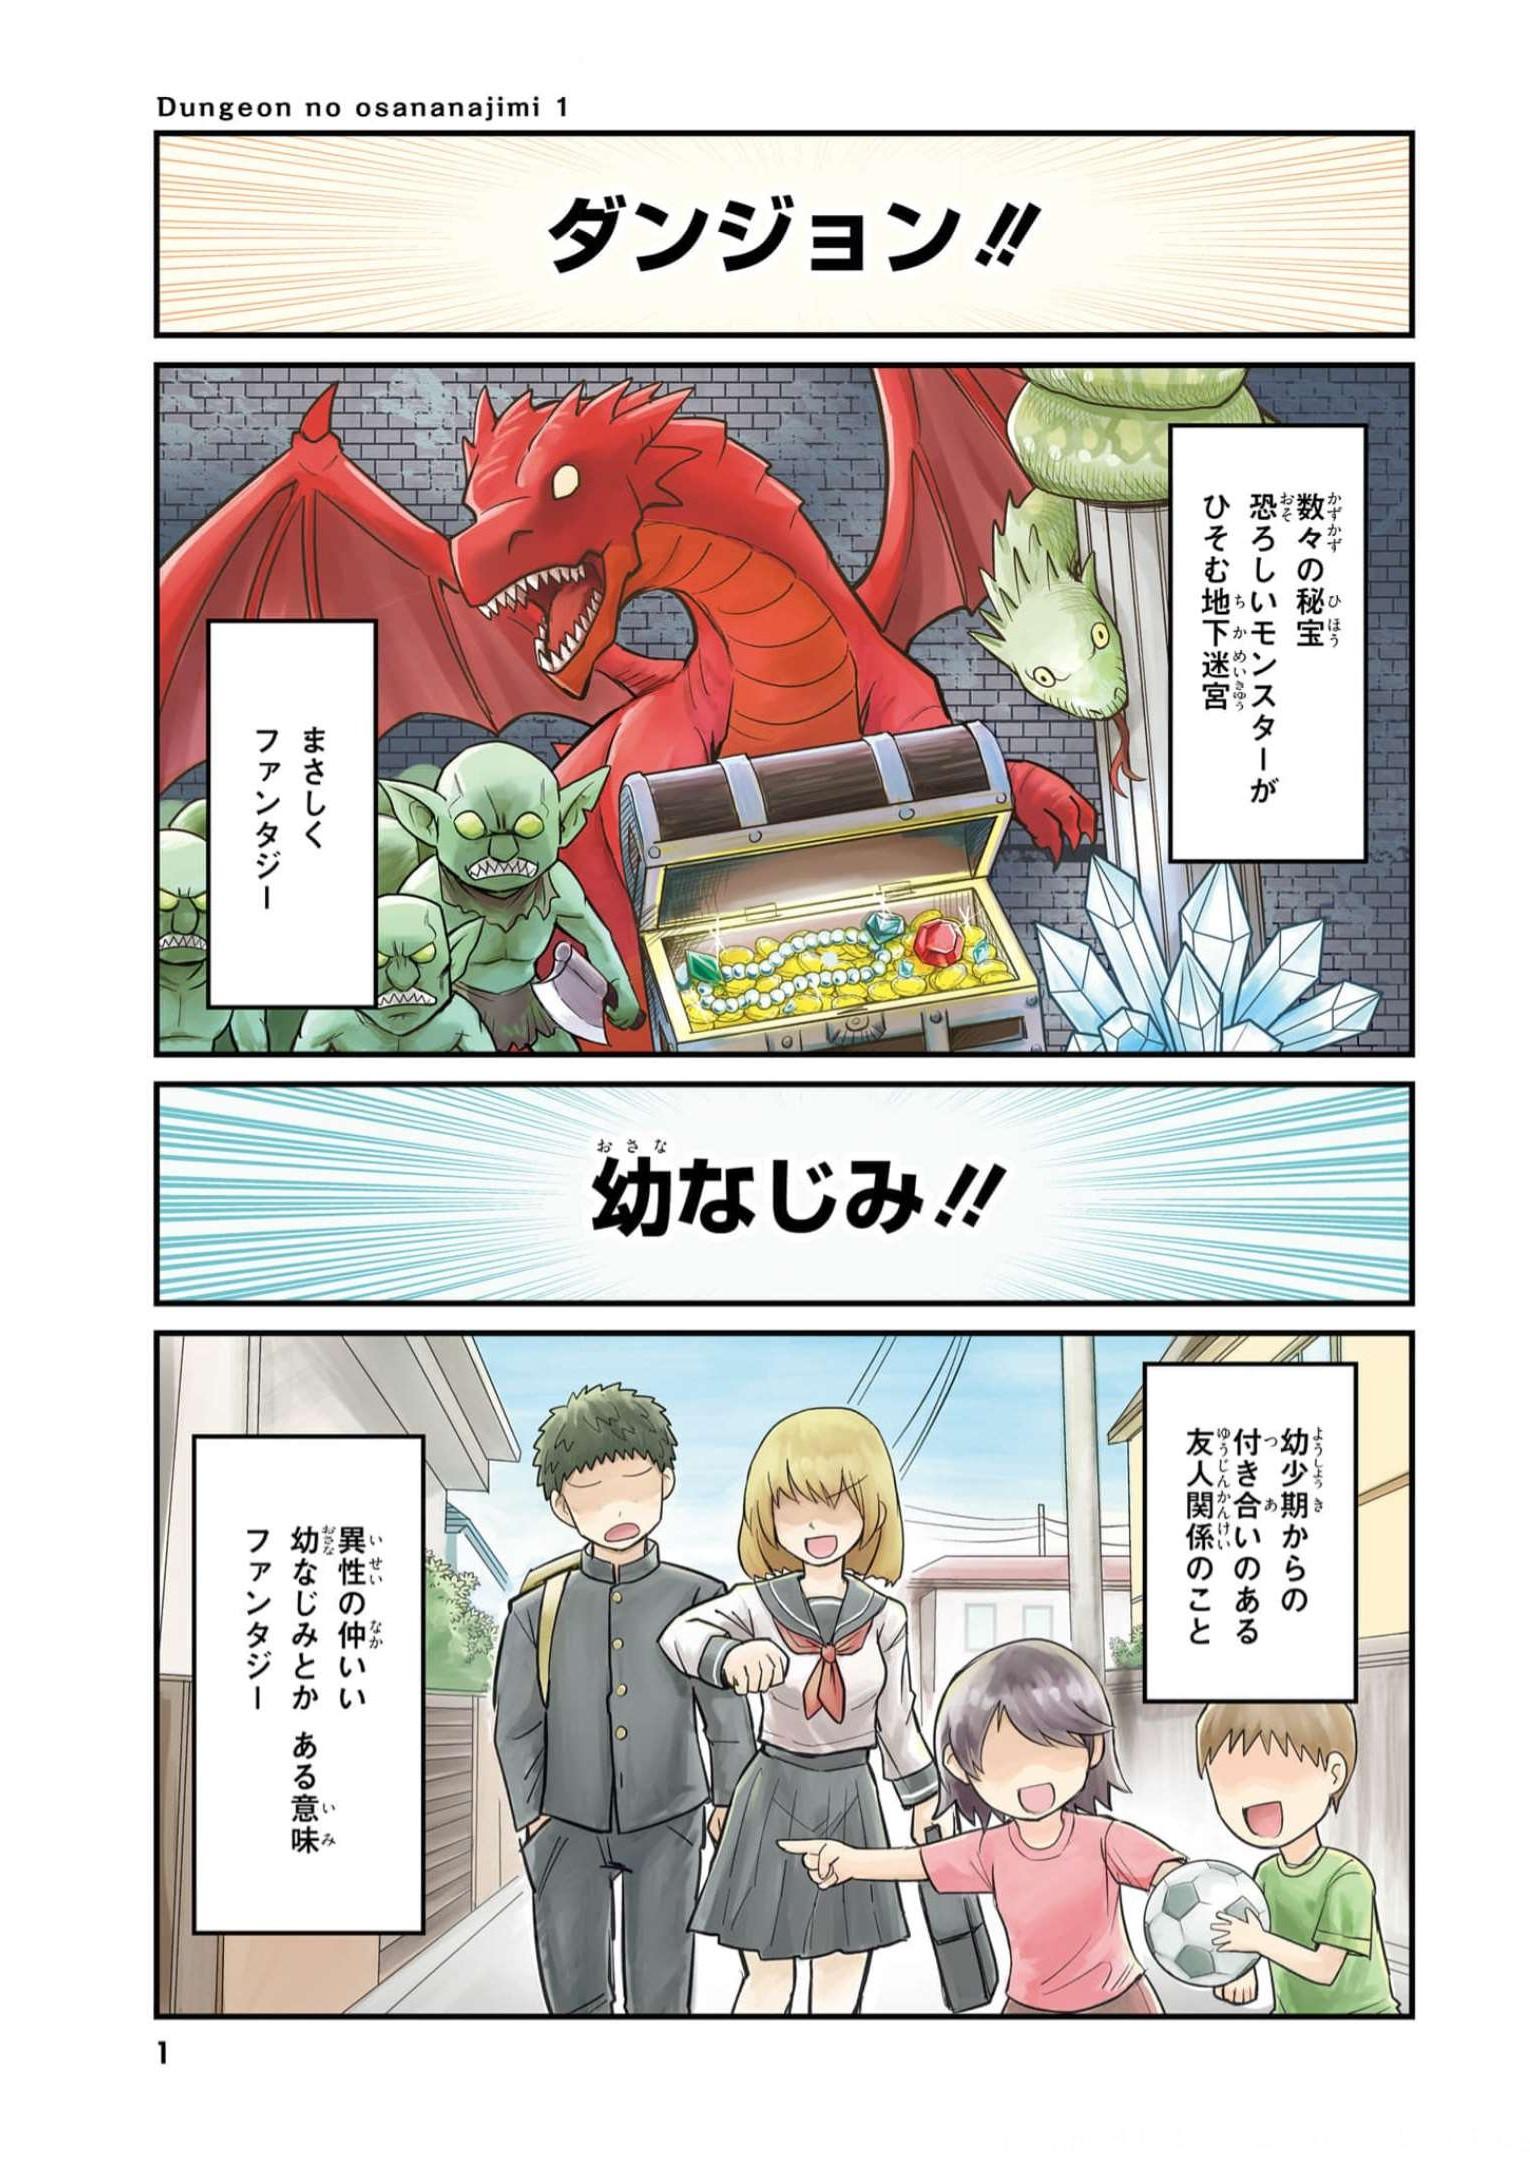 Dungeon Friends Forever Dungeon’s Childhood Friend ダンジョンの幼なじみ 第1話 - Page 1